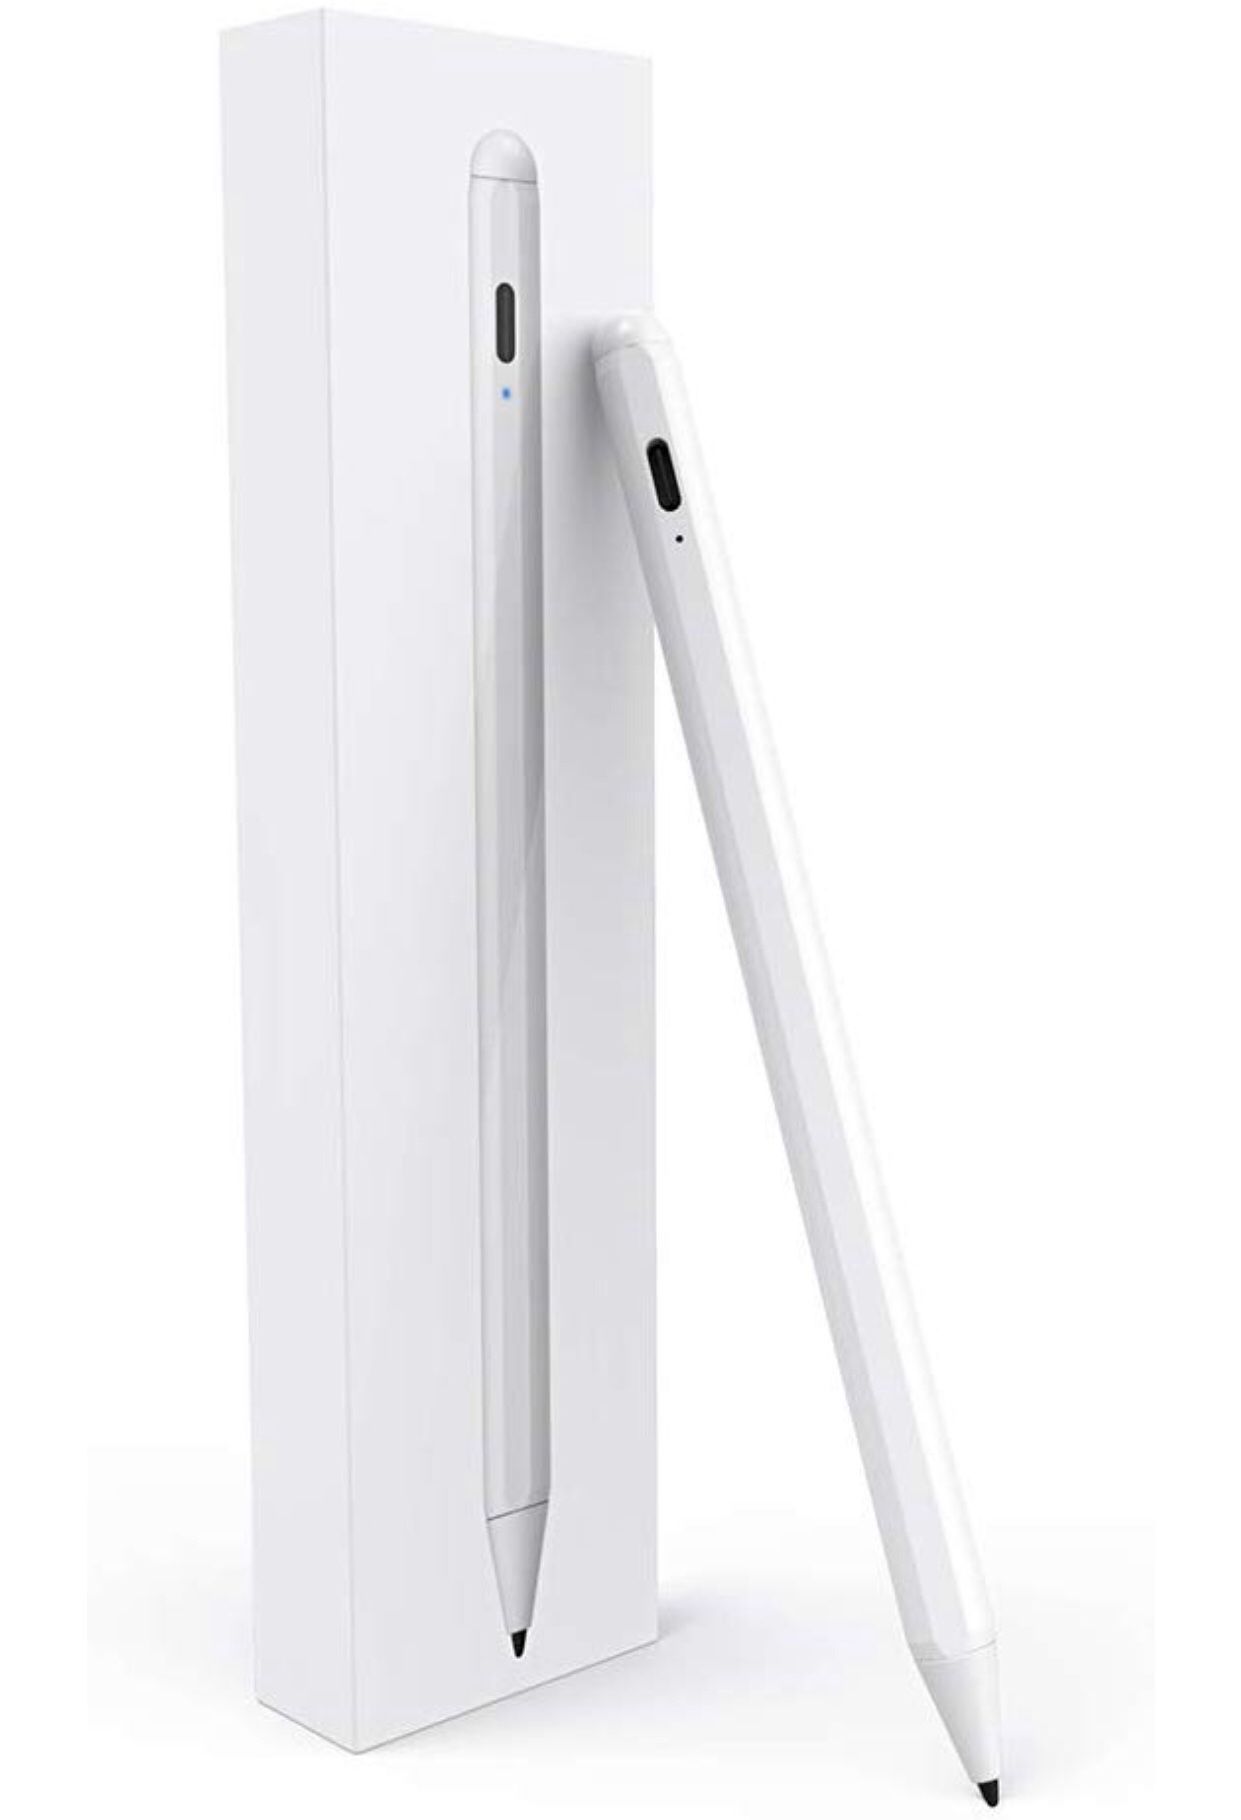 iPad Stylus 2 Generation iPad Pro Pencil 2 Gen with palm rejection compatible with Apple Pencil 2